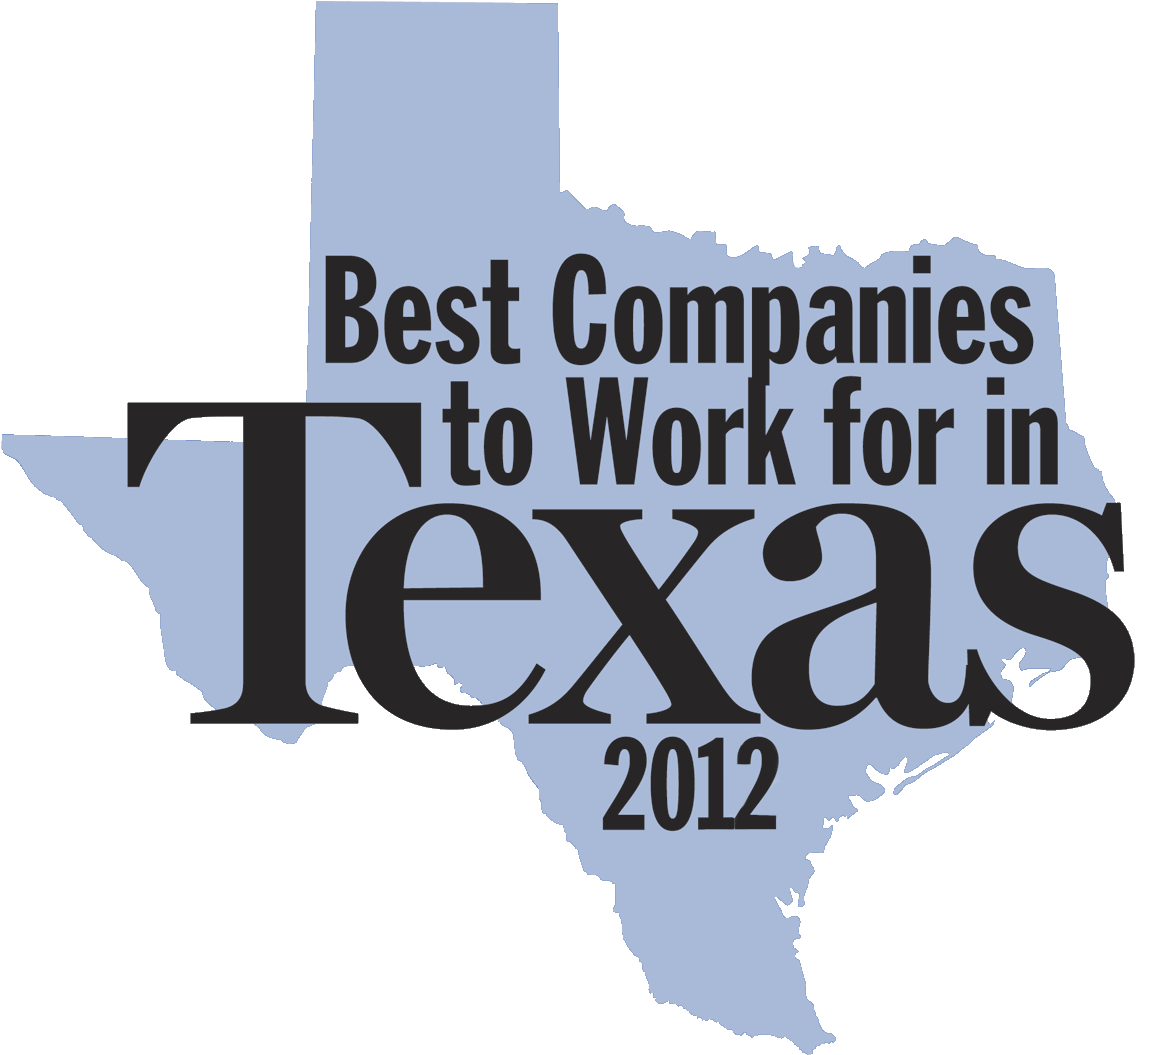 Best Companies To Work For In Texas - Moral Controversies In American Politics (1200x1072)